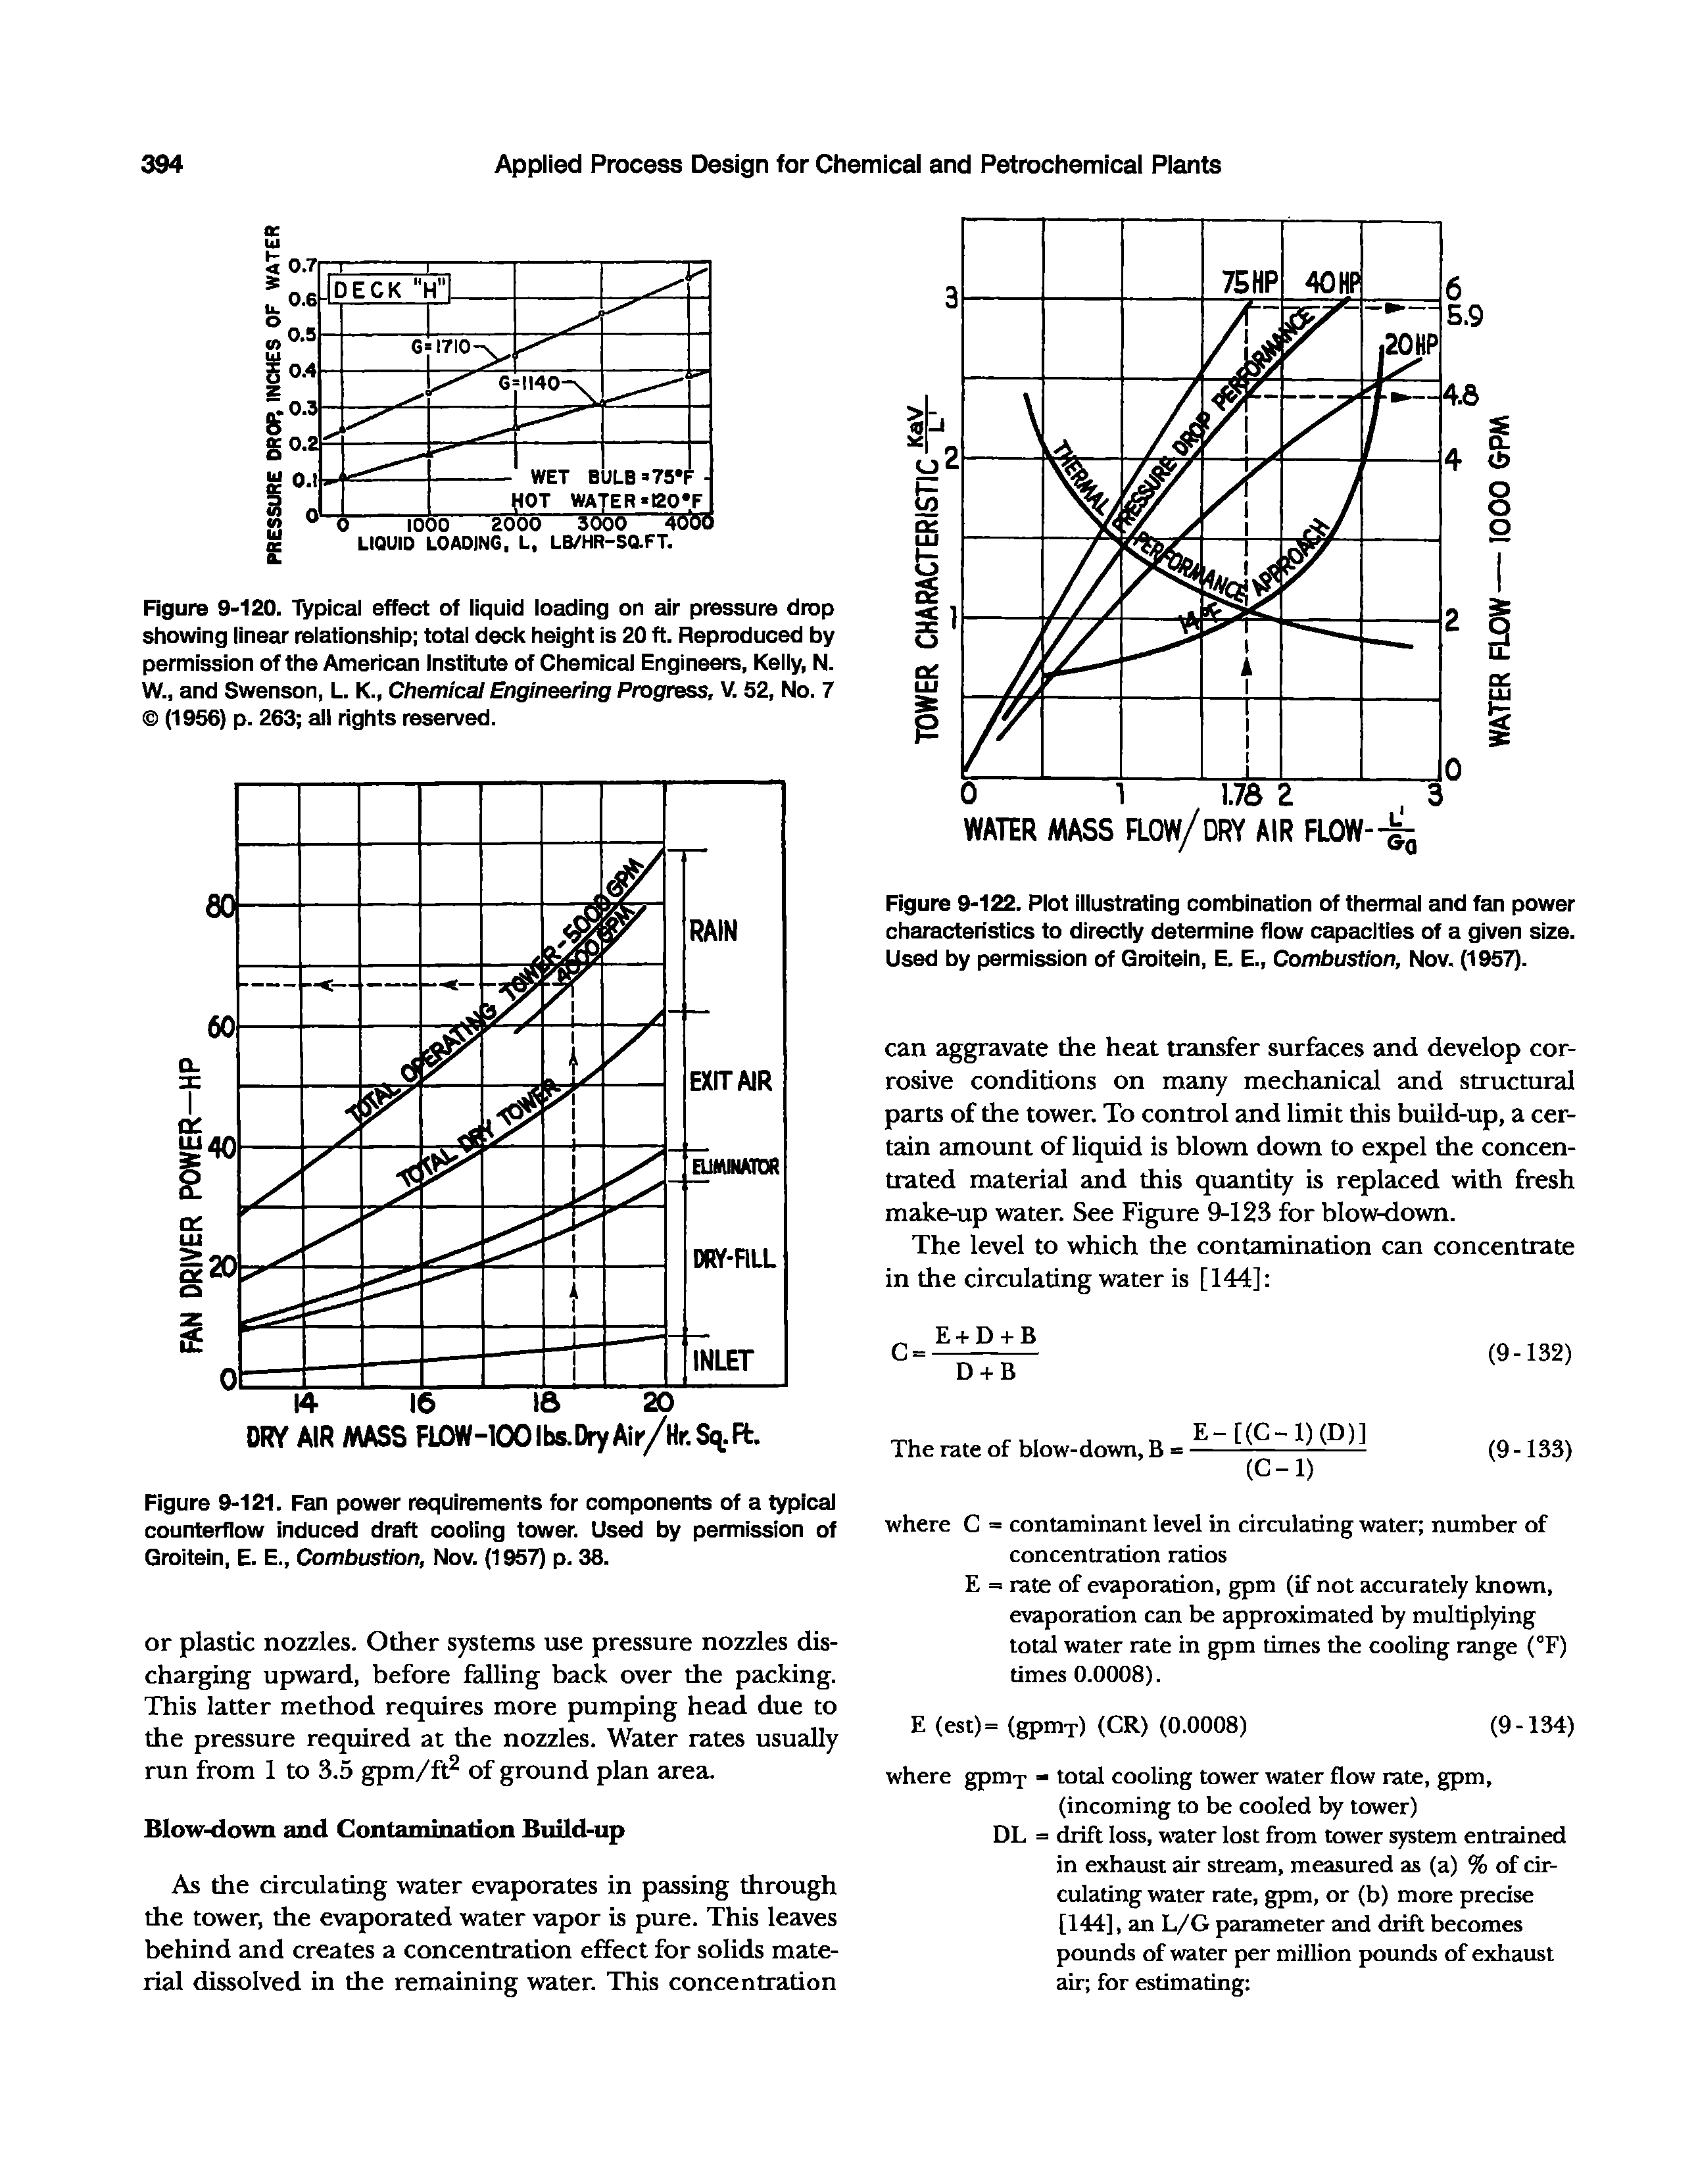 Figure 9-122. Plot illustrating combination of thermai and fan power characteristics to directiy determine flow capacities of a given size. Used by permission of Groitein, E. E., Combustion, Nov. (1957).